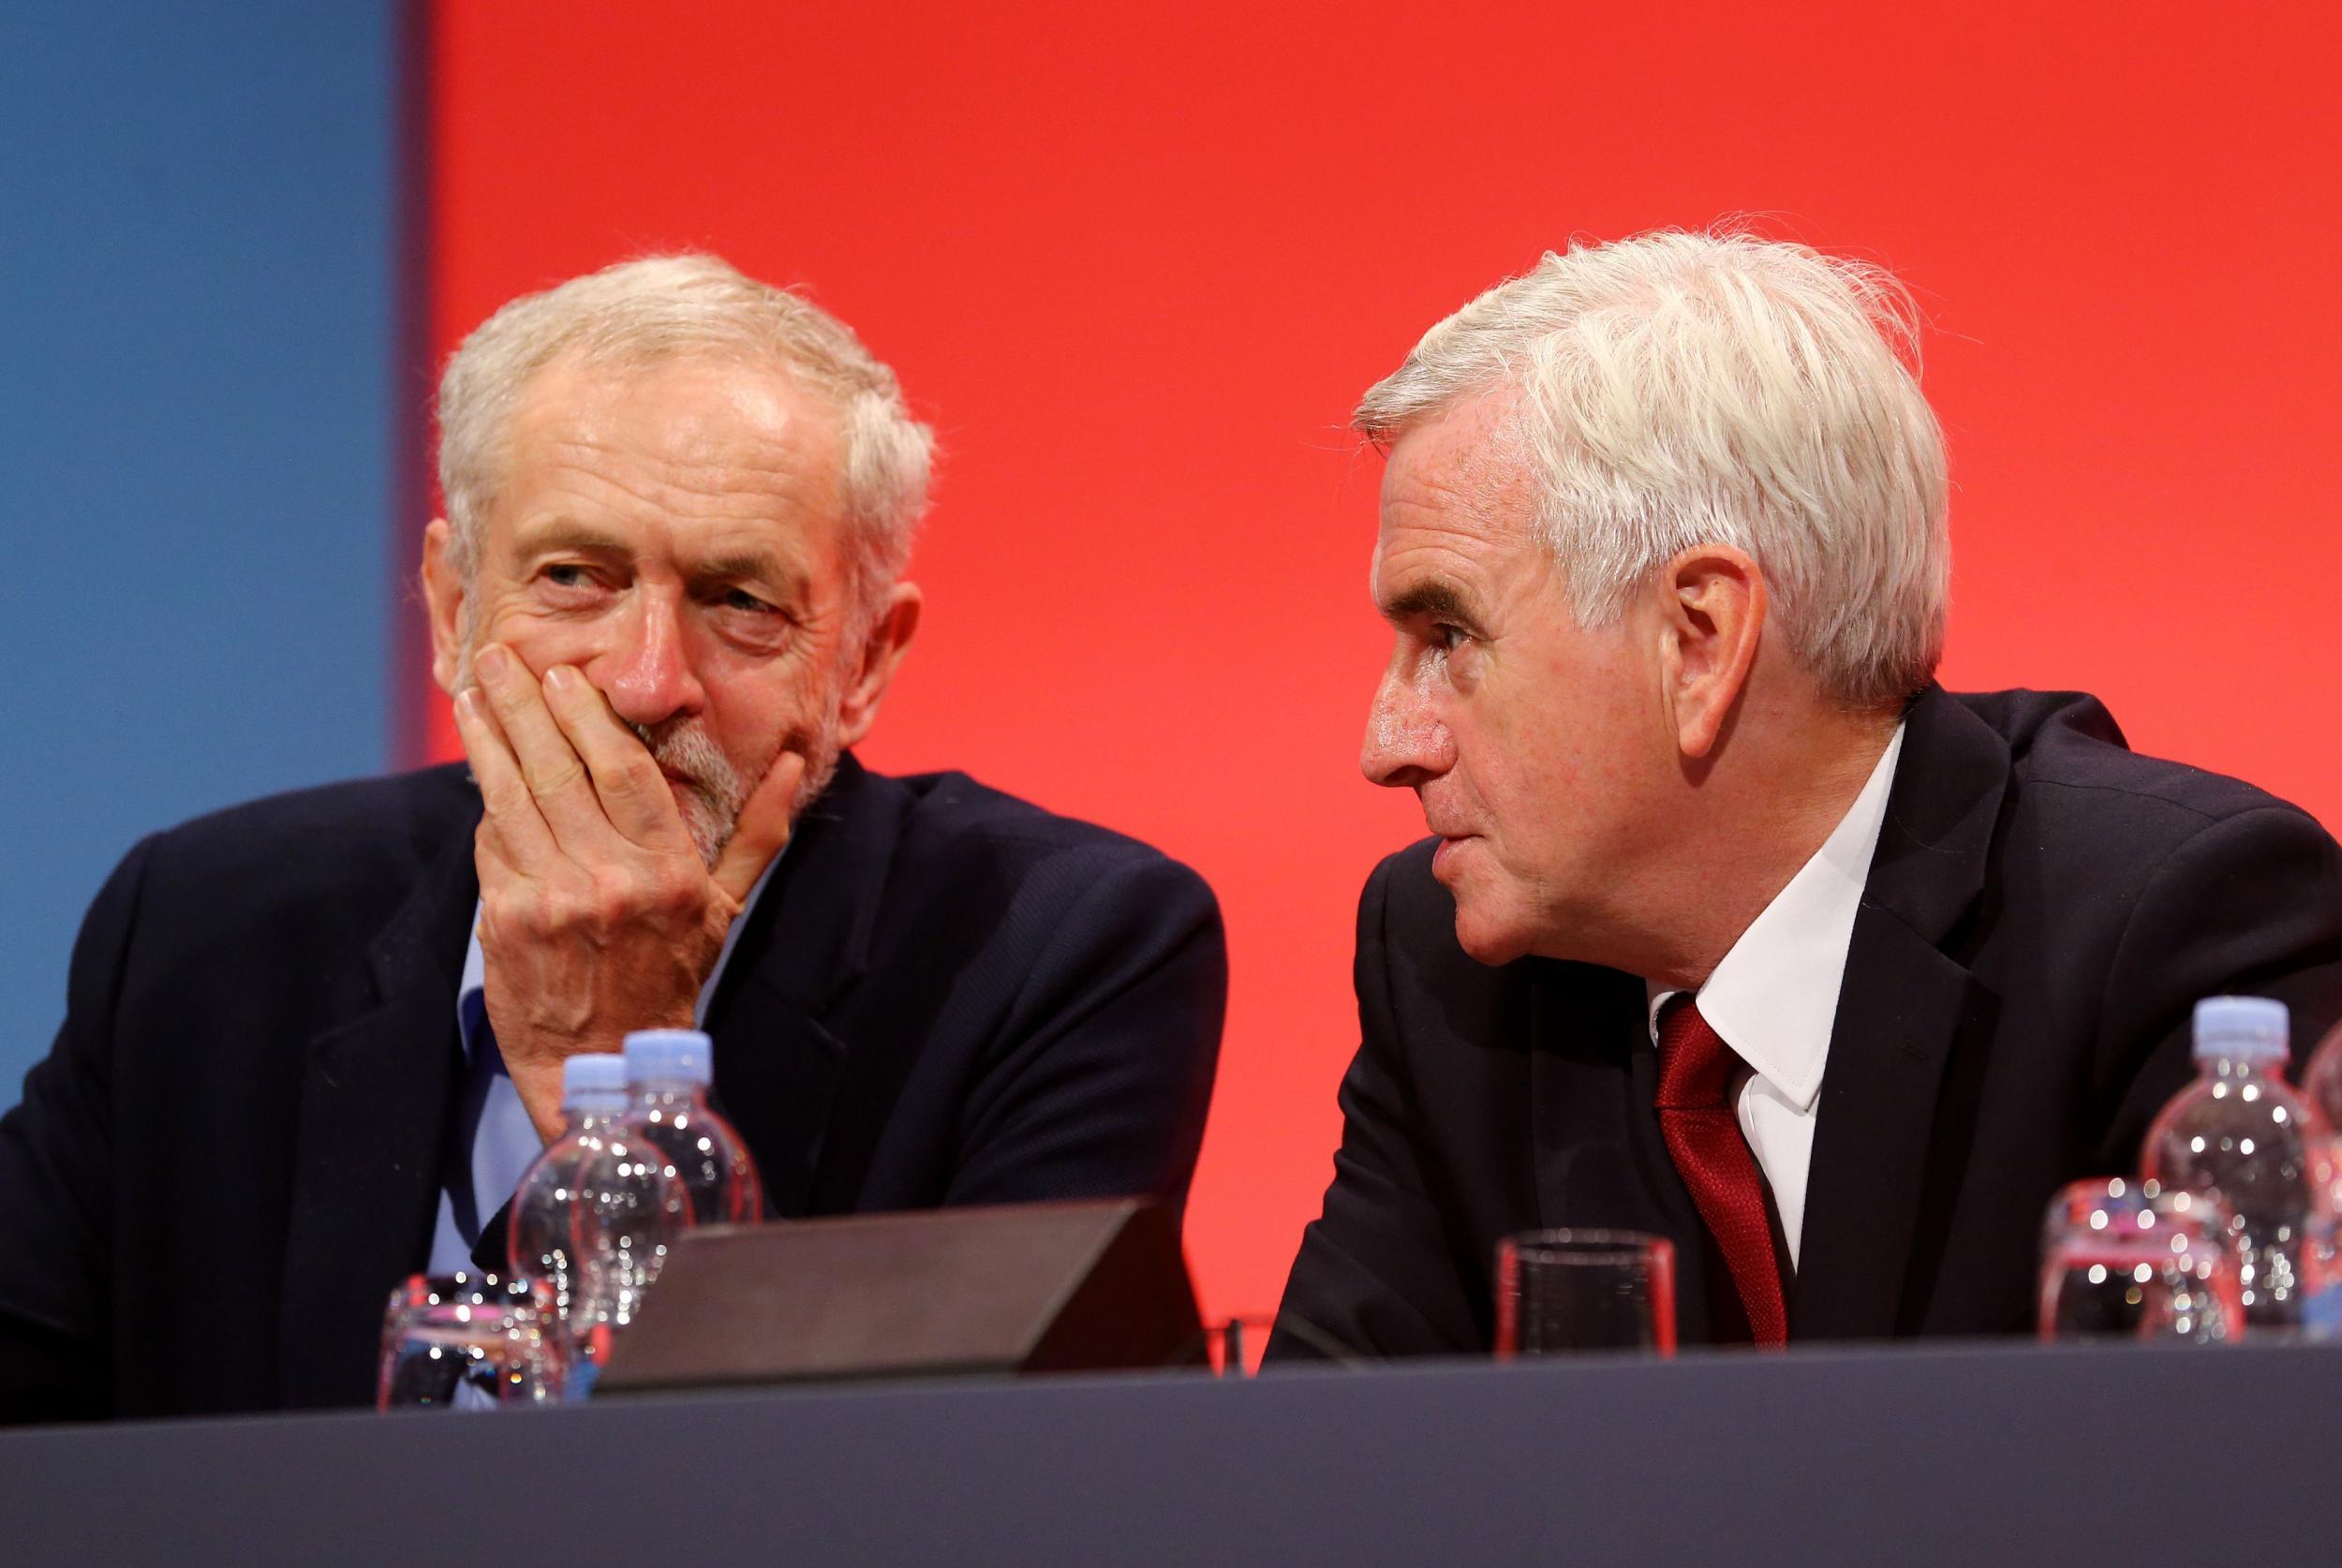 The 'ten freedom tests' are a clear challenge to the Labour leadership